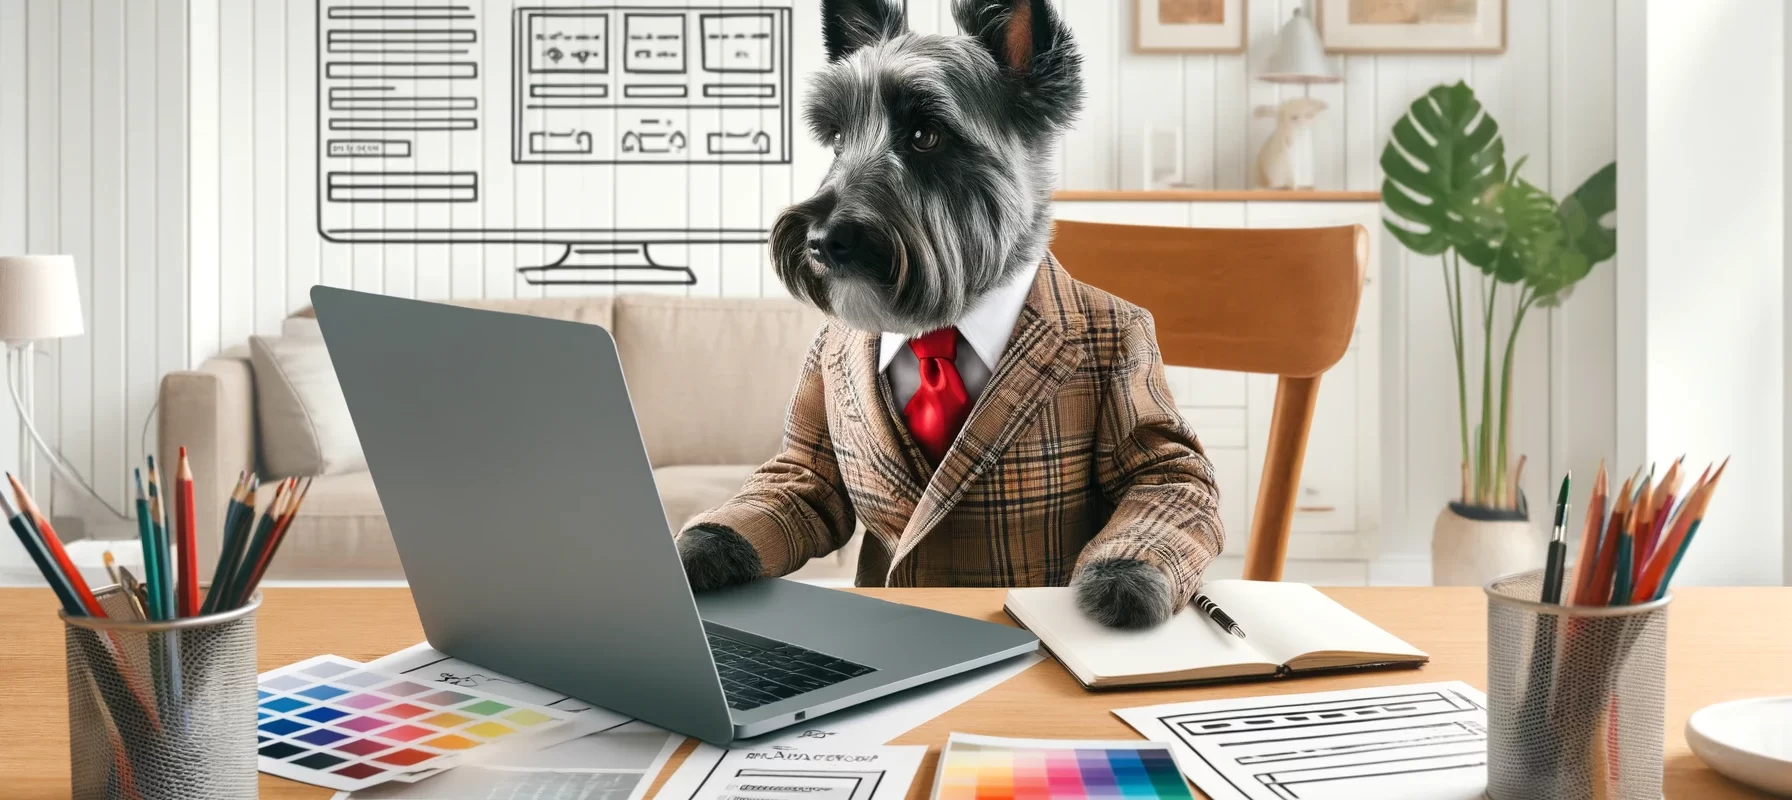 Scottish Terrier dressed neatly, working on a laptop, surrounded by web design tools in a modern office setting.